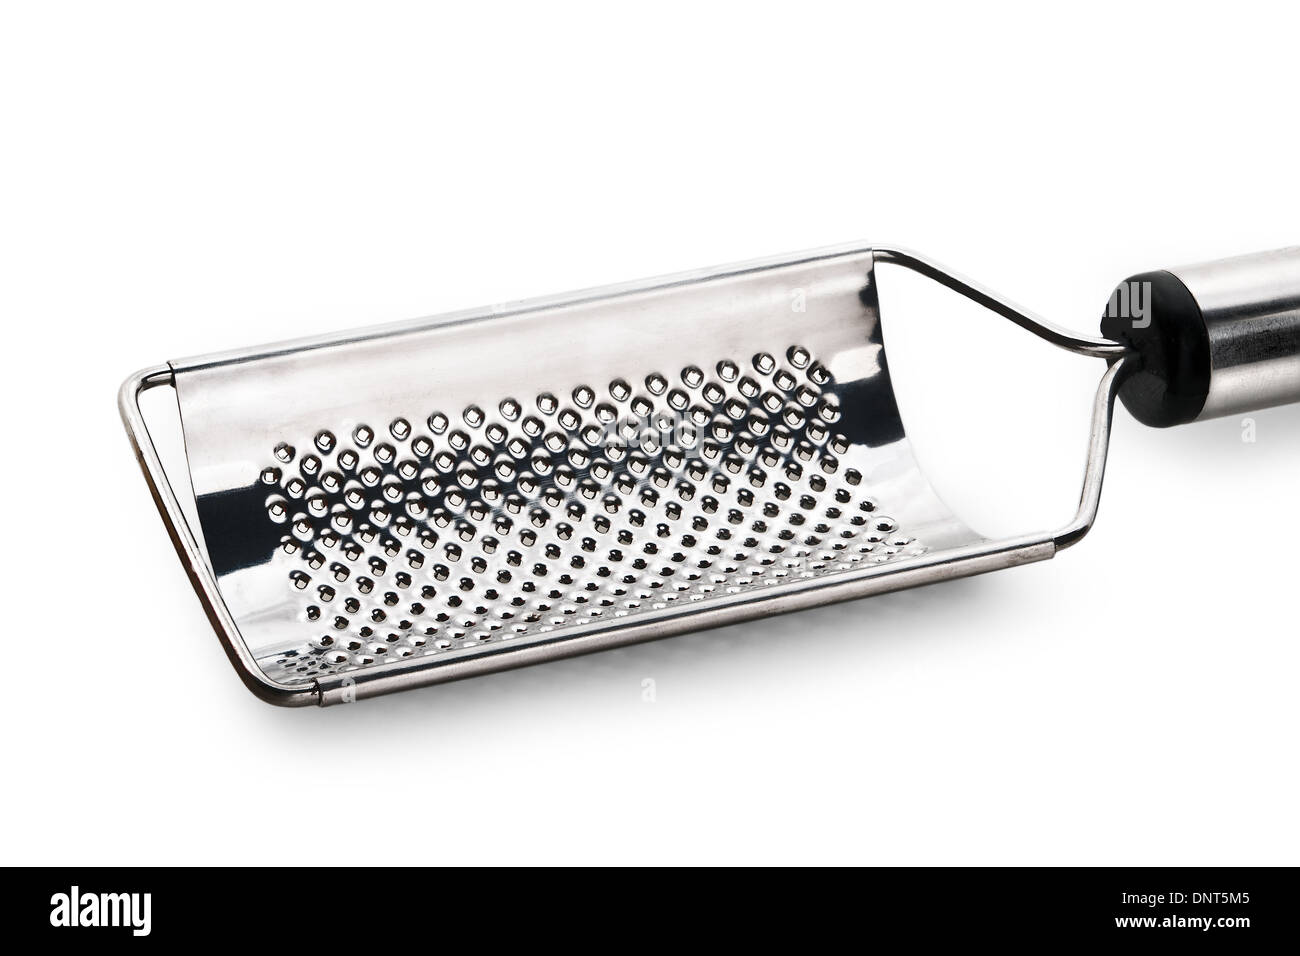 https://c8.alamy.com/comp/DNT5M5/cheese-grater-isolated-on-white-background-DNT5M5.jpg